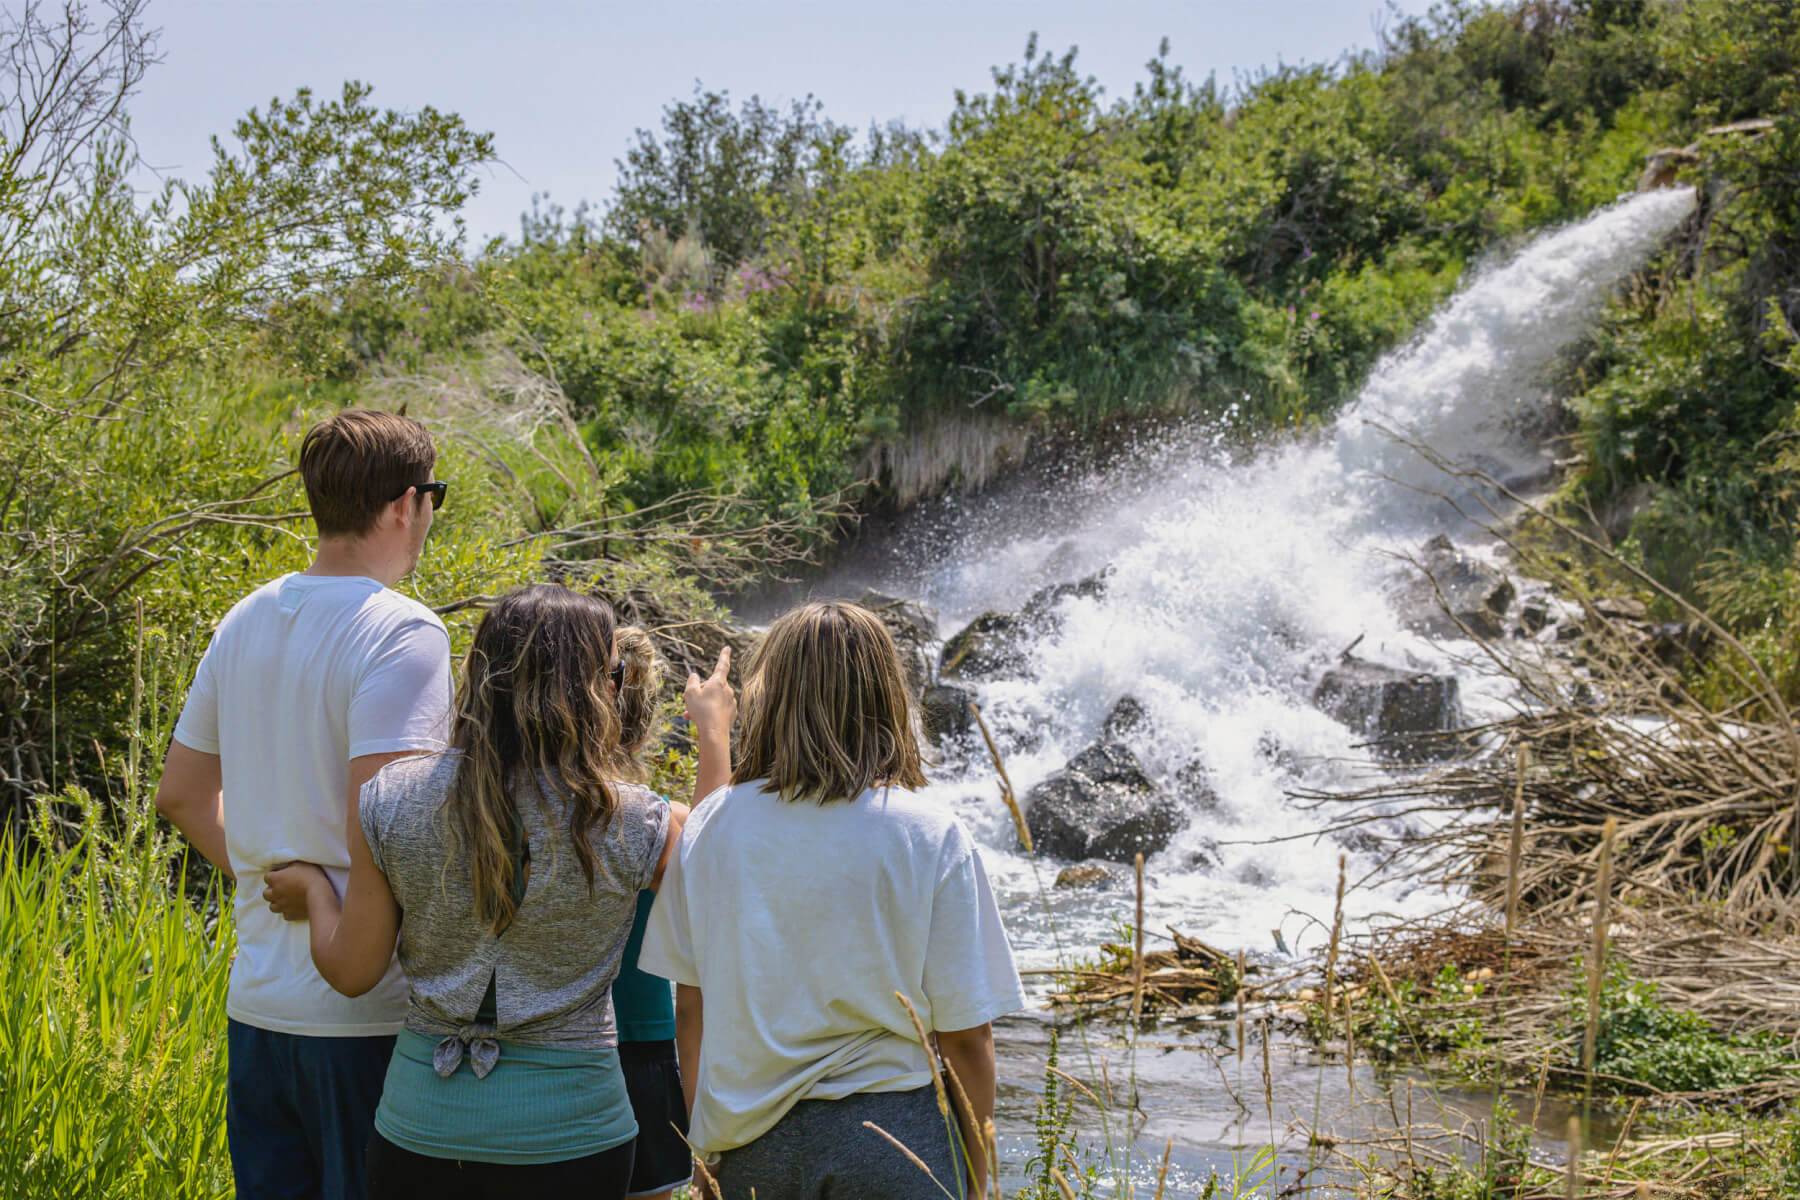 a group of people looking at a spring gushing out water from the side of a brush covered hill